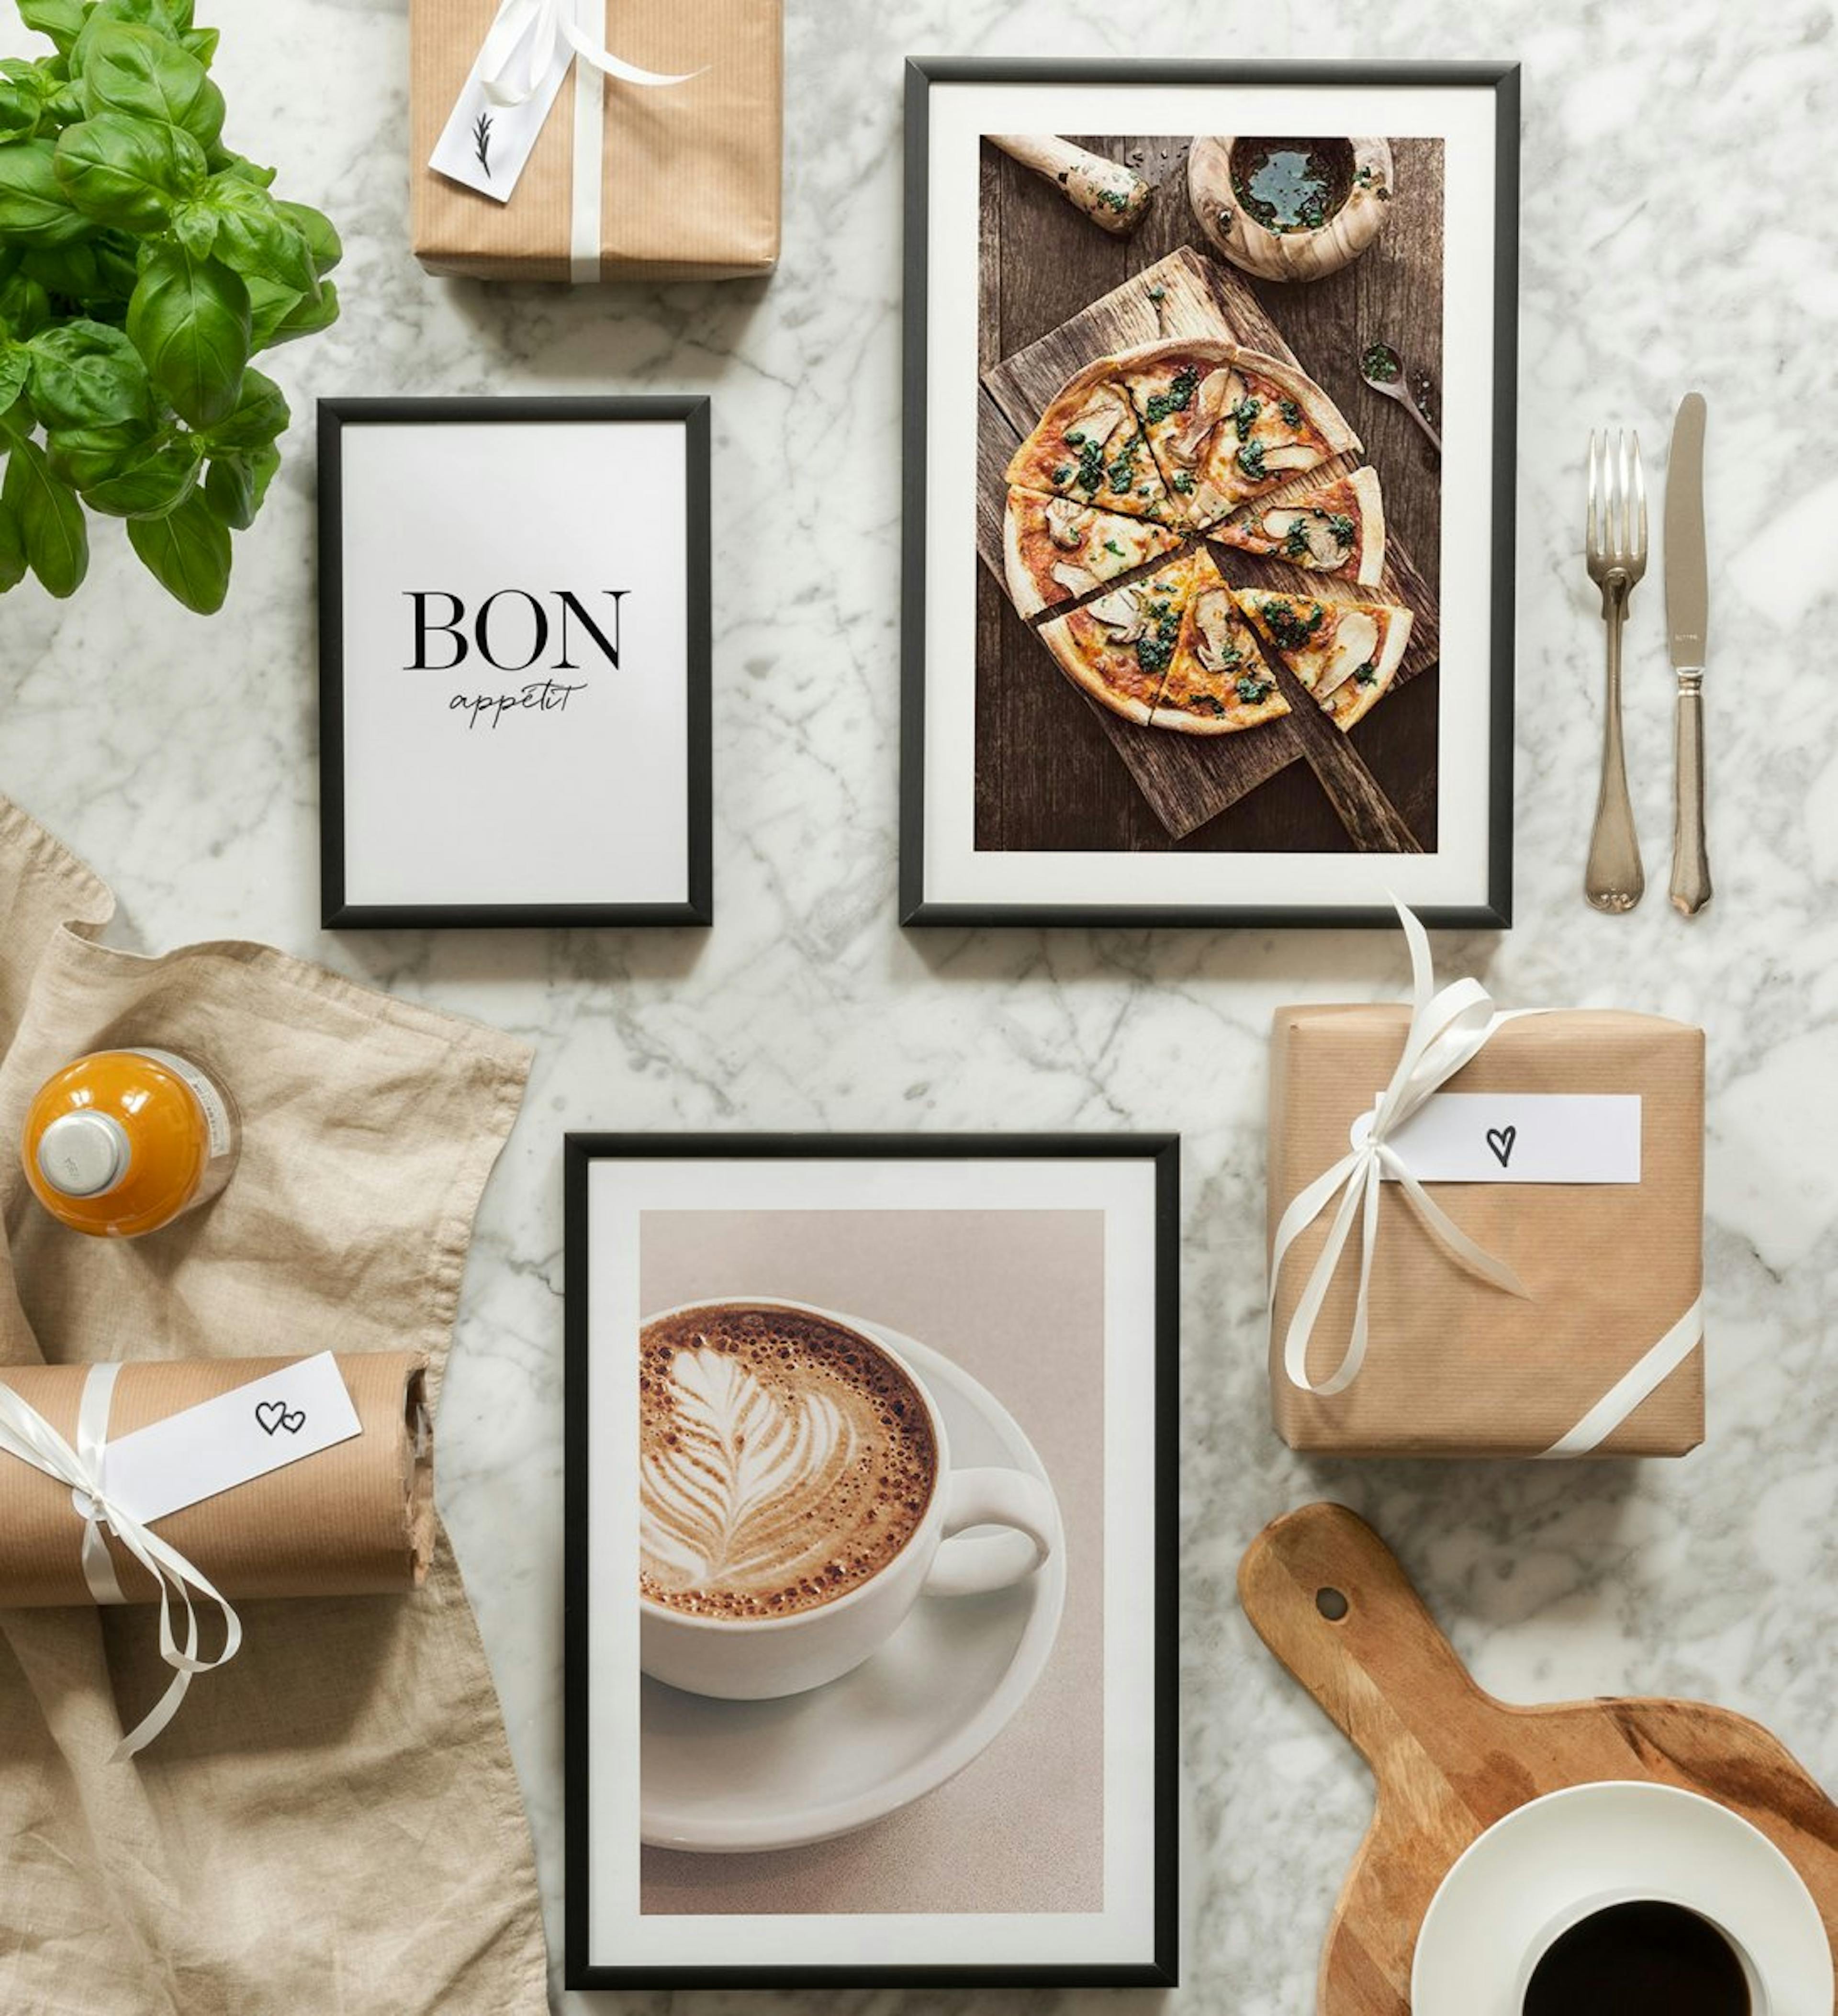 Gallery wall with delicious kitchen wall art prints with food and drink photographs and quotes with dark metal frames. The perfe